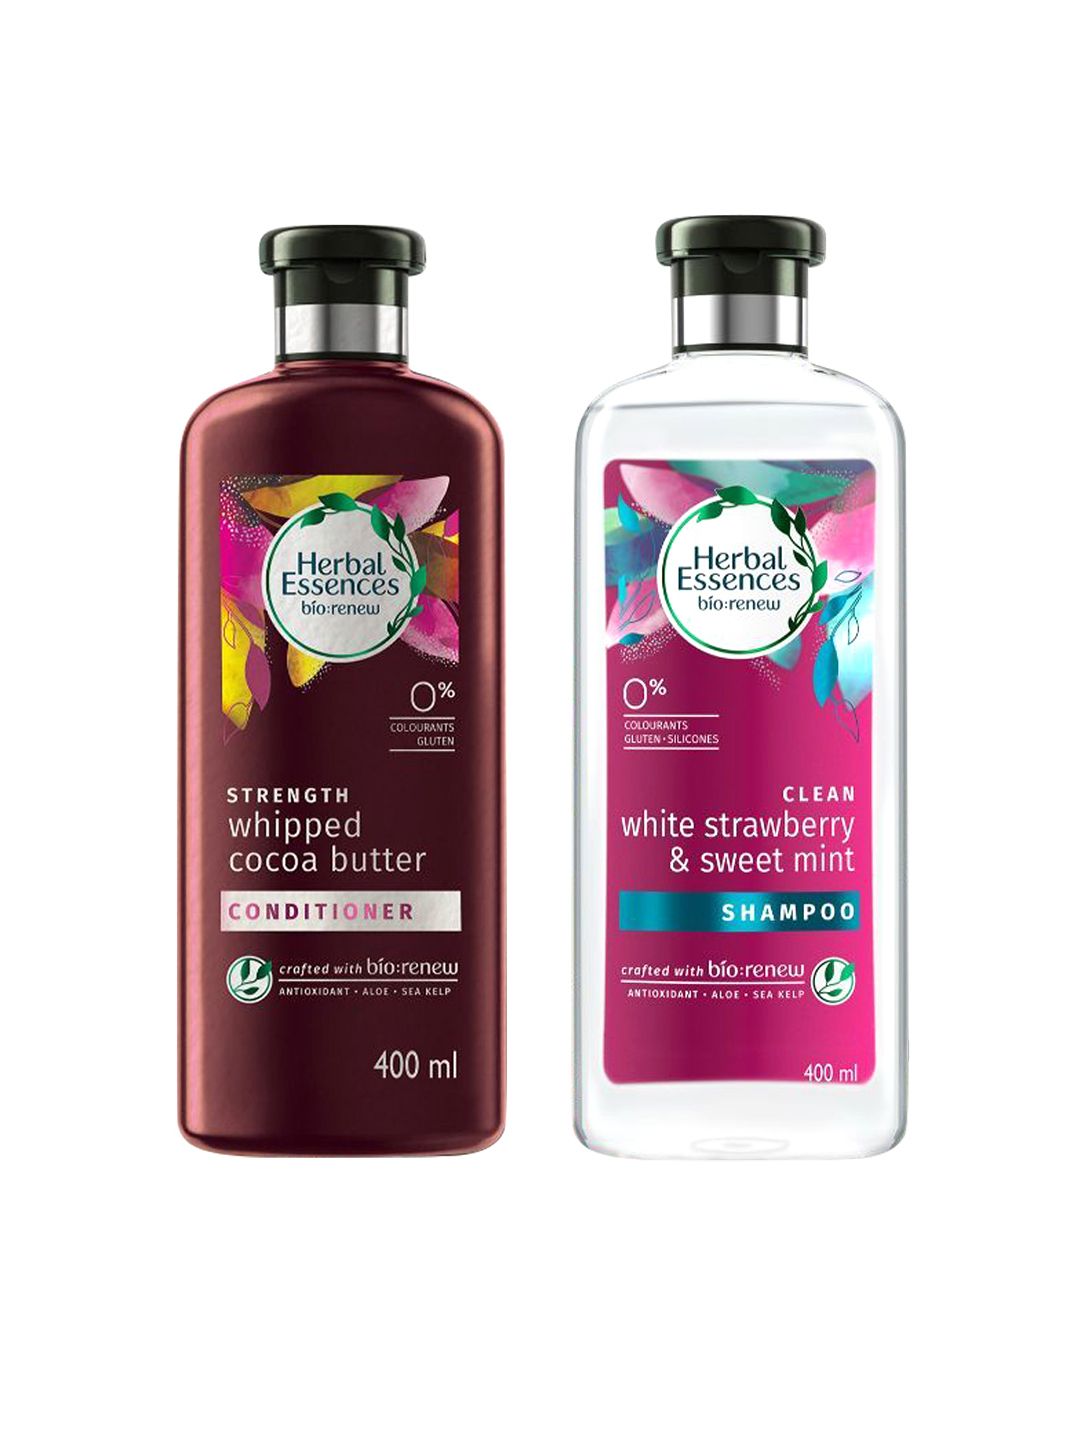 Herbal Essences Set of Cocoa Butter Conditioner & Strawberry & Sweet Mint Shampoo Price in India